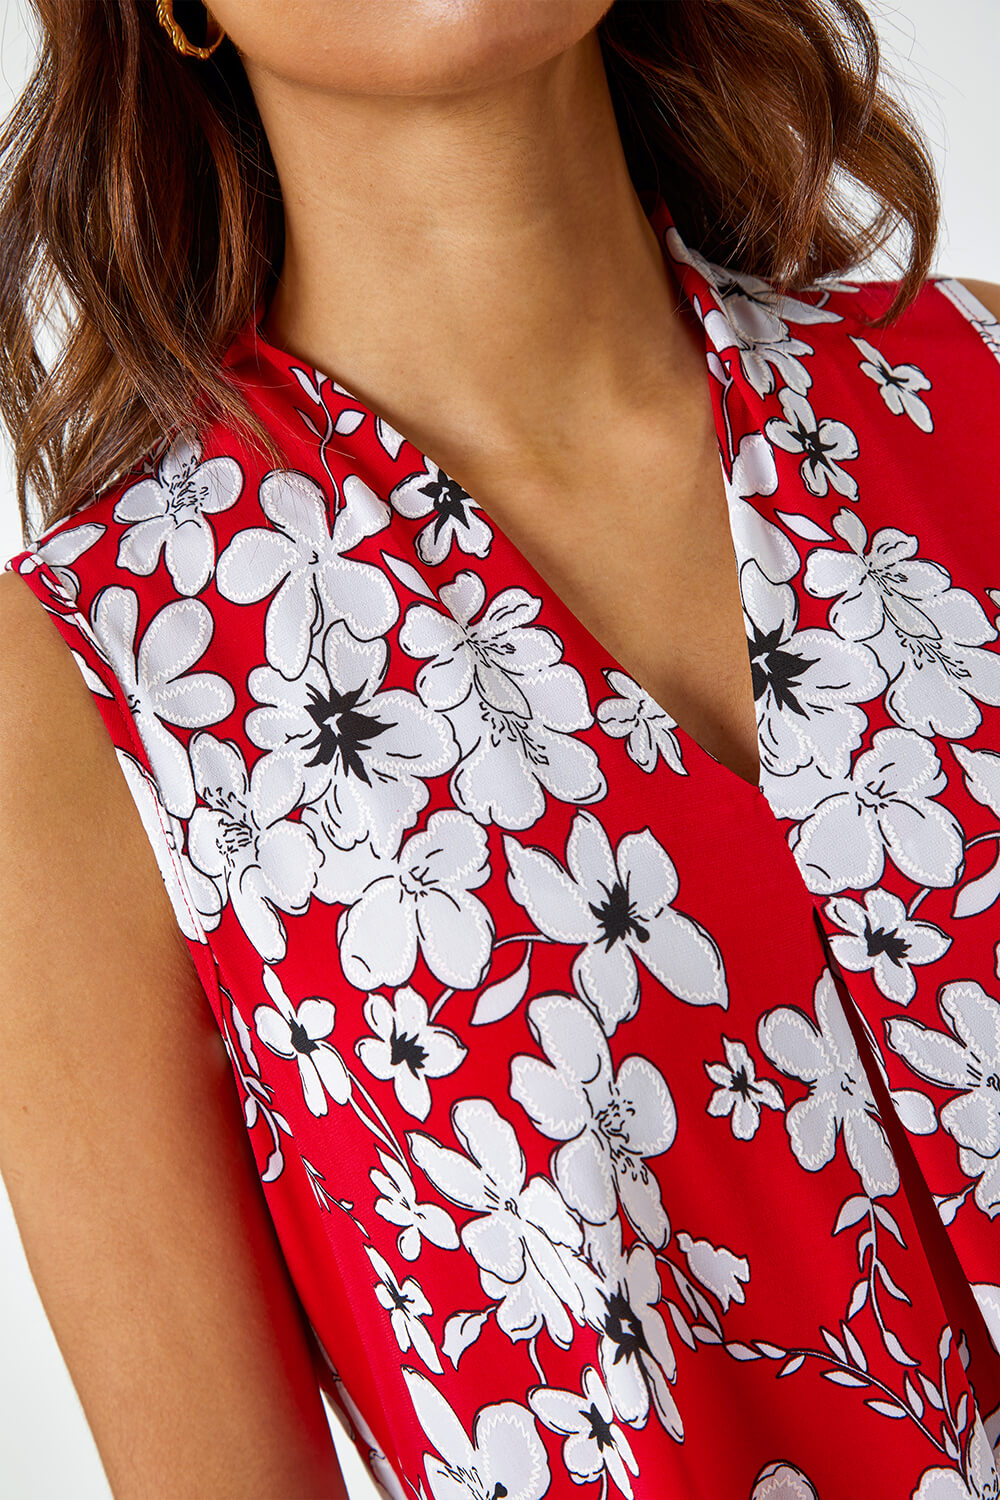 Red Textured Floral Print Sleeveless Top, Image 5 of 5